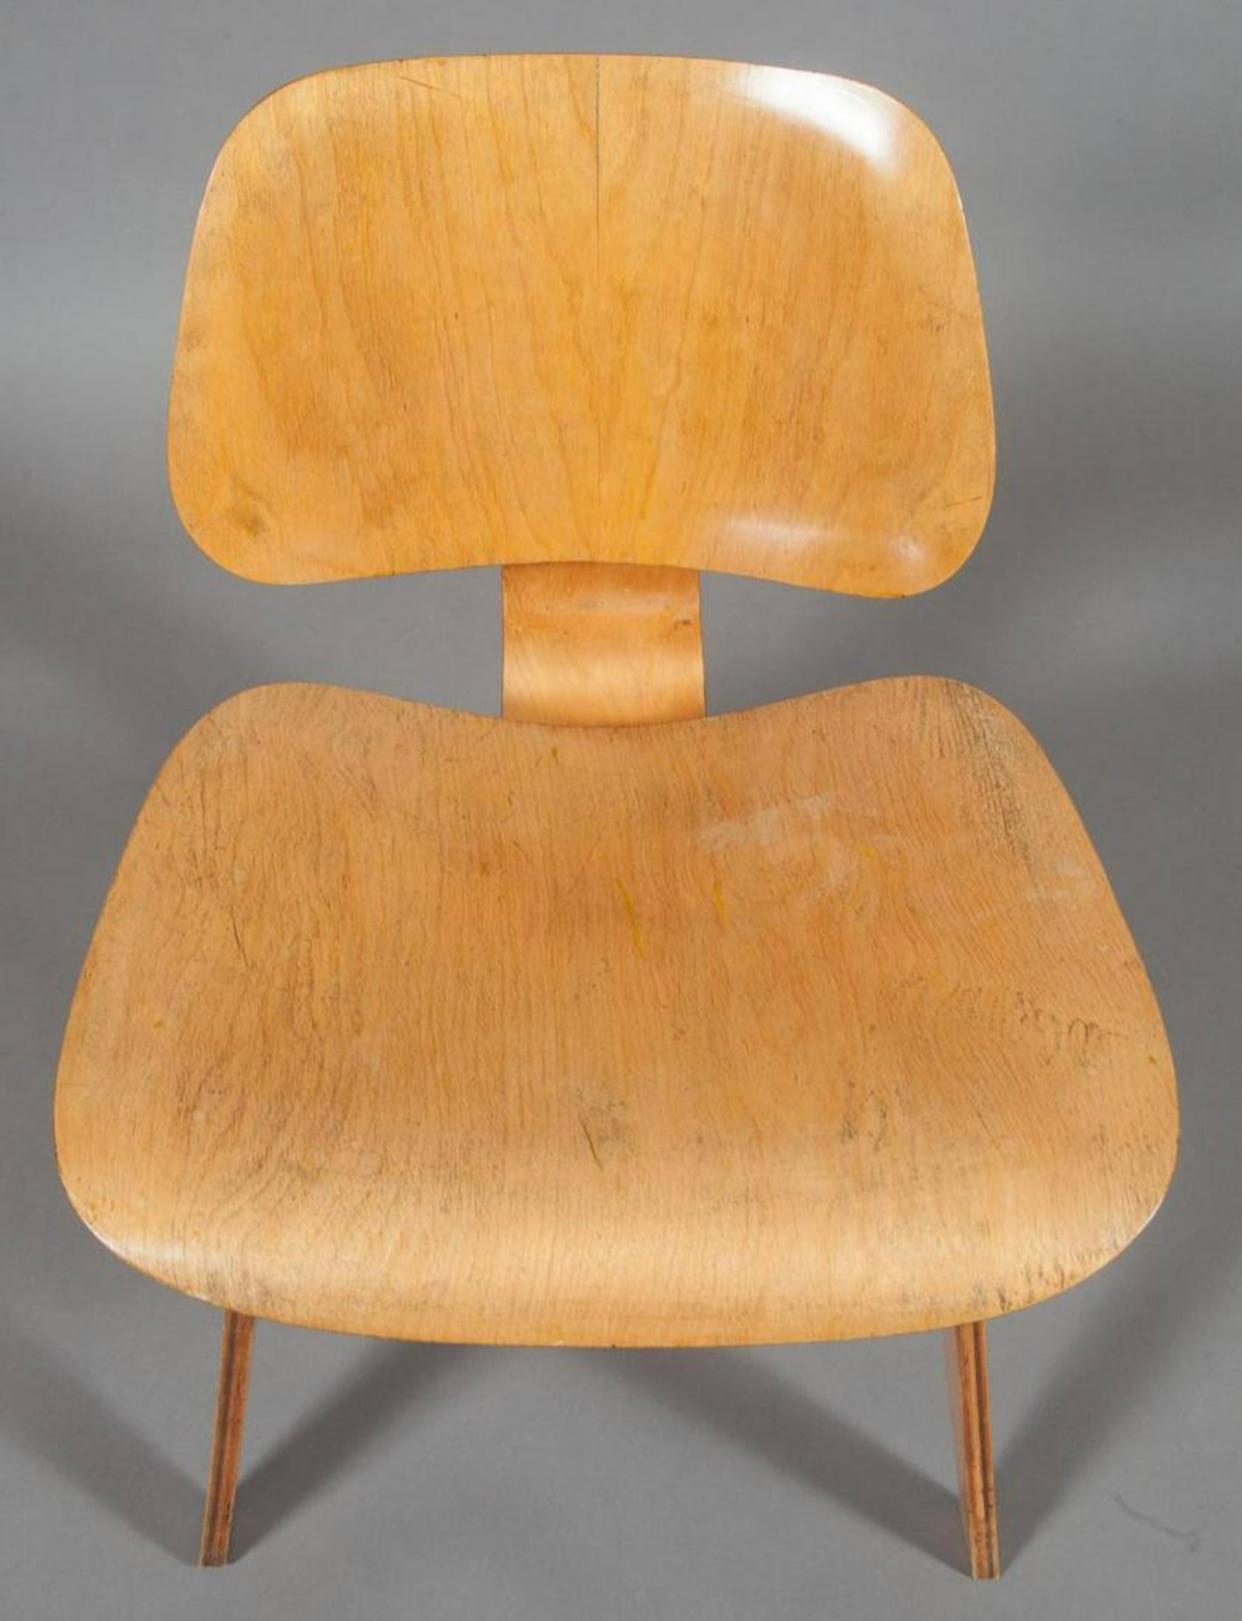 Molded 1940s Eames LCW Lounge Chair by Evans Products